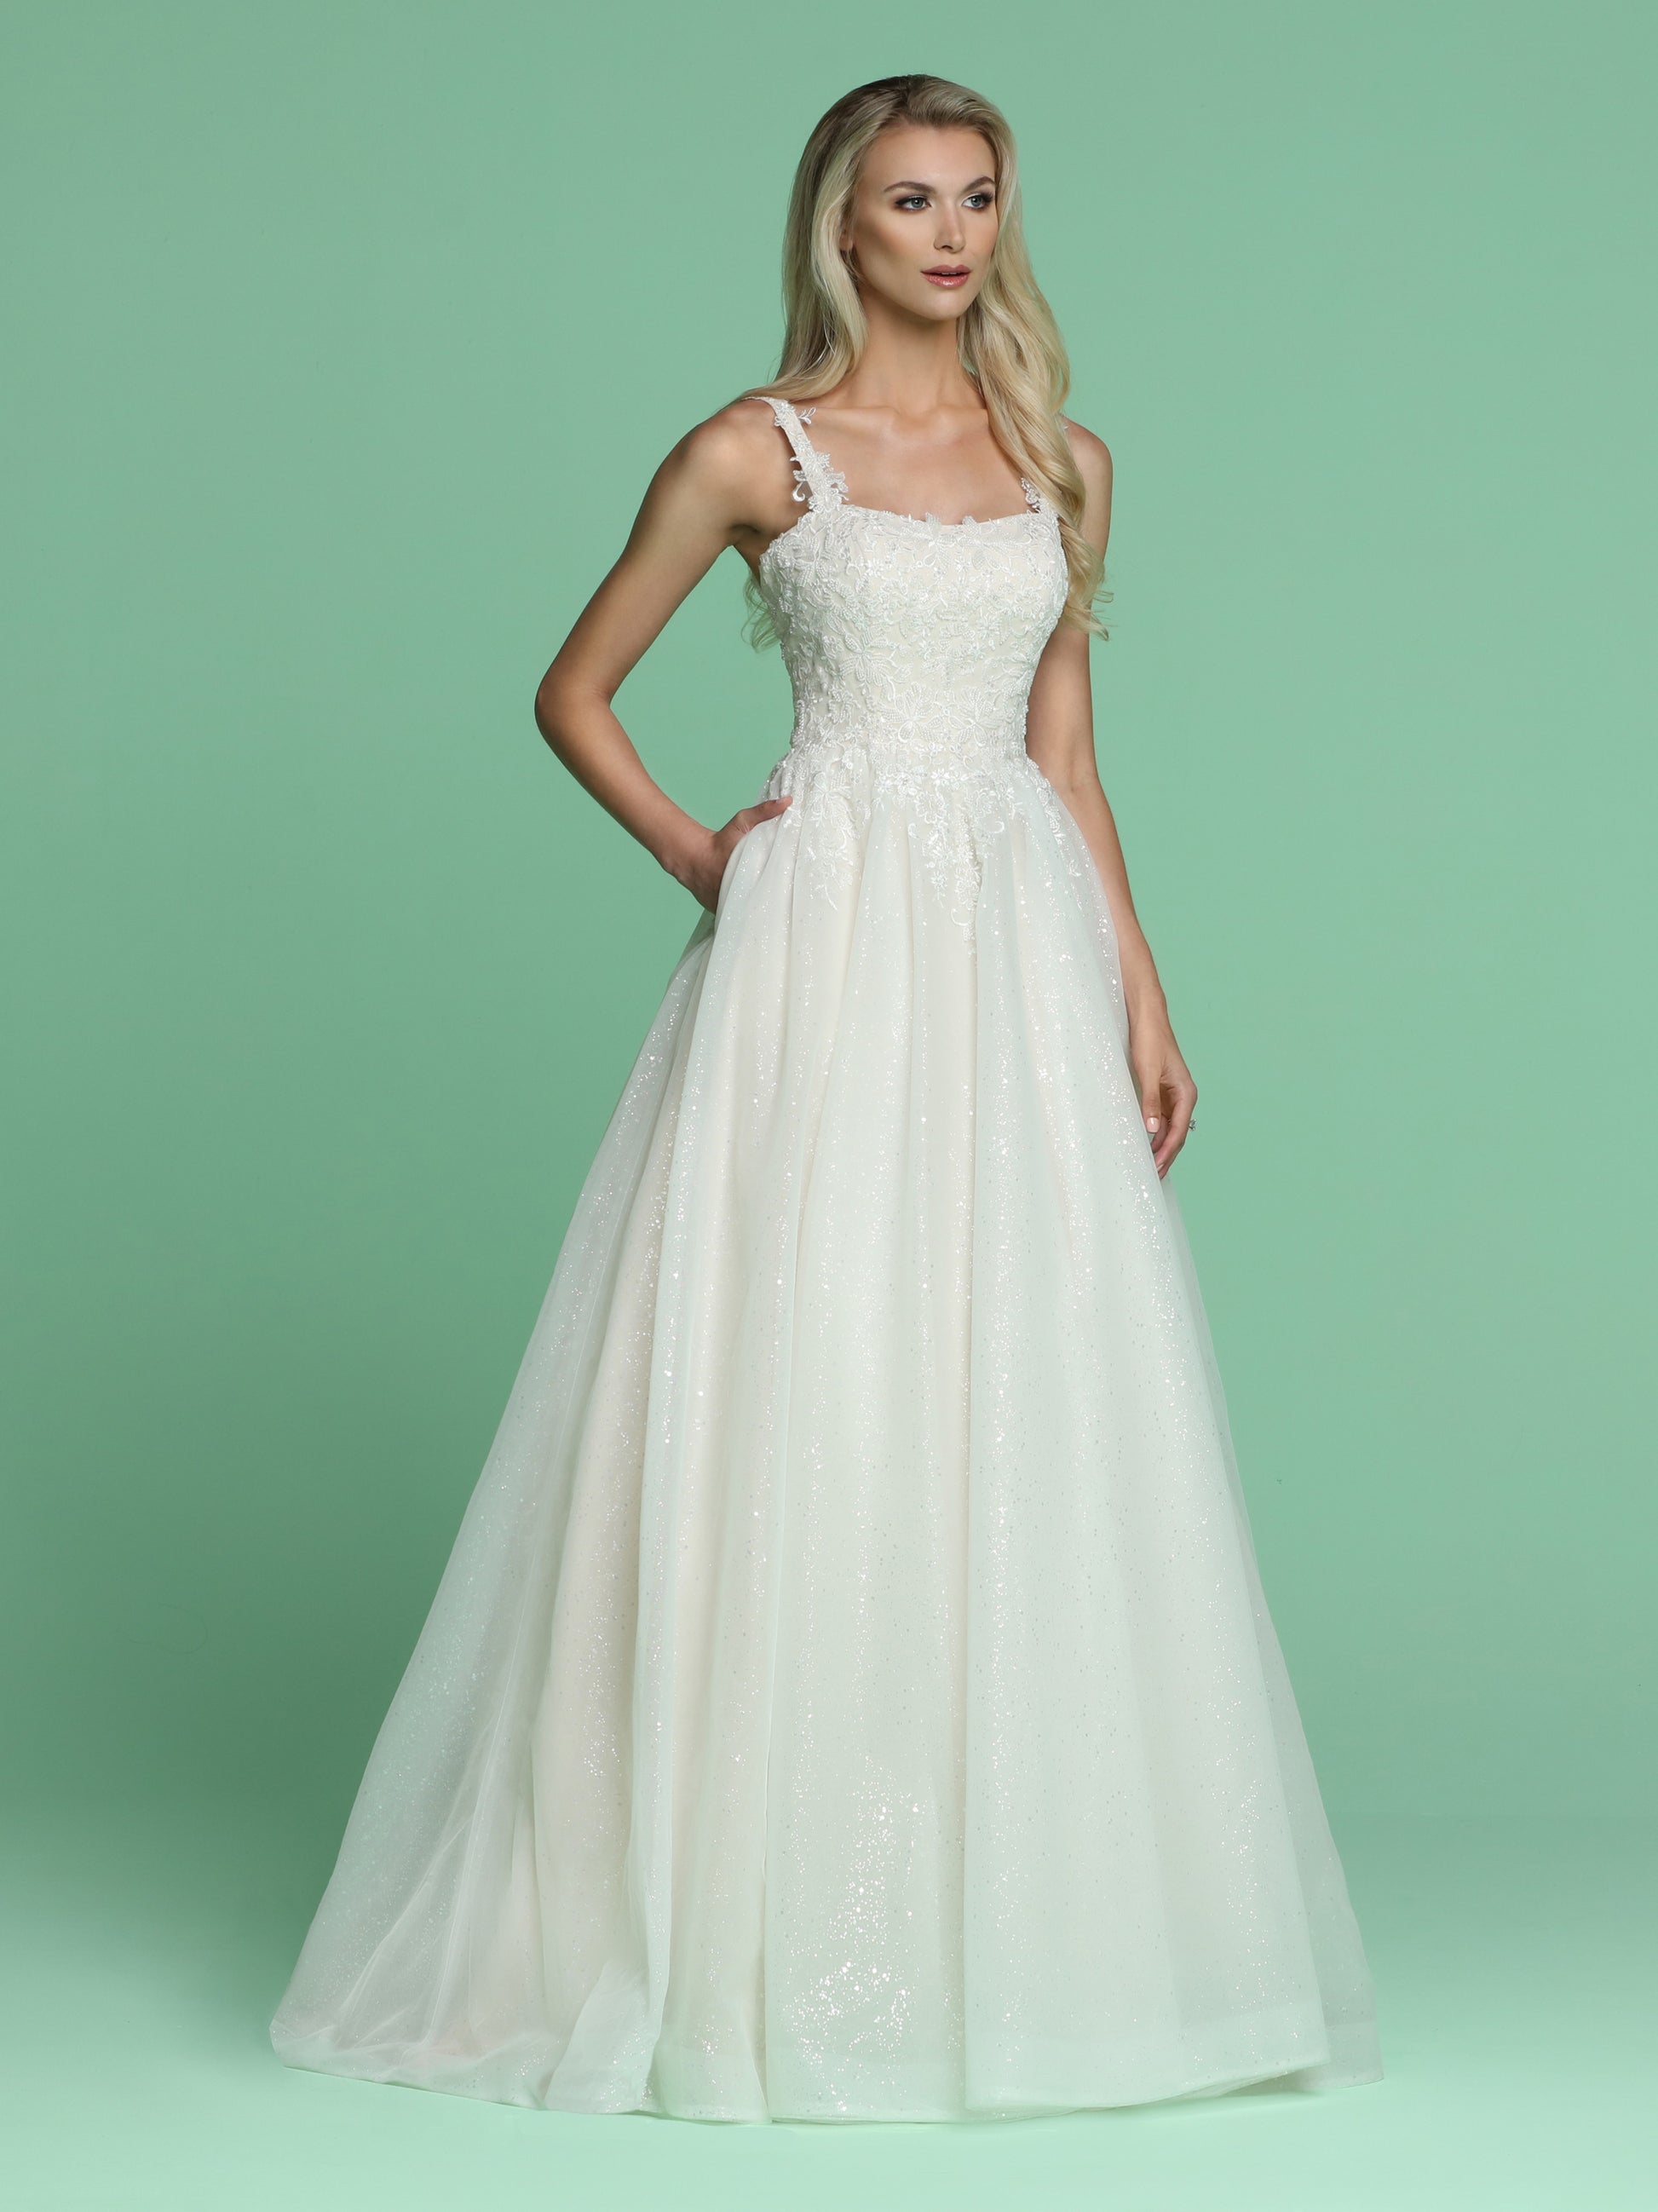 Davinci Bridal 50628 is a Beautiful Long Shimmering wedding dress. Featuring a Fitted bodice with embroidered lace cascading into a stunning Glitter shimmer tulle A line ball gown skirt with pockets and a lush train. Straps with embroidered lace cascading over. Available for 1-2 Week Delivery!!!  Available Sizes: 2,4,6,8,10,12,14,16,18,20  Available Colors: Ivory/Blush, Ivory/Ivory